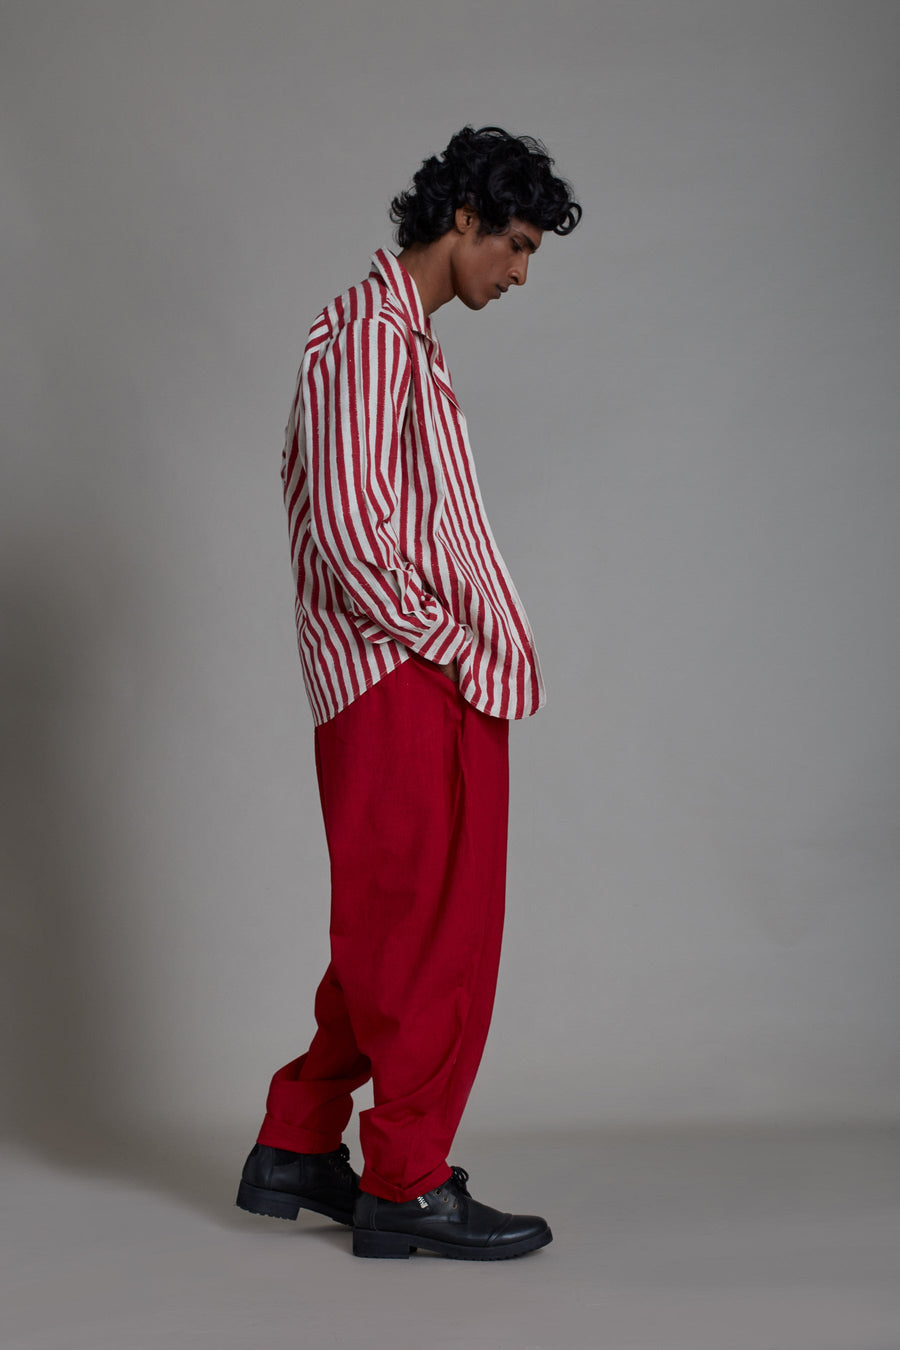 A Model Wearing White Pure Cotton Red Striped Taash Set-3 Pcs, curated by Only Ethikal